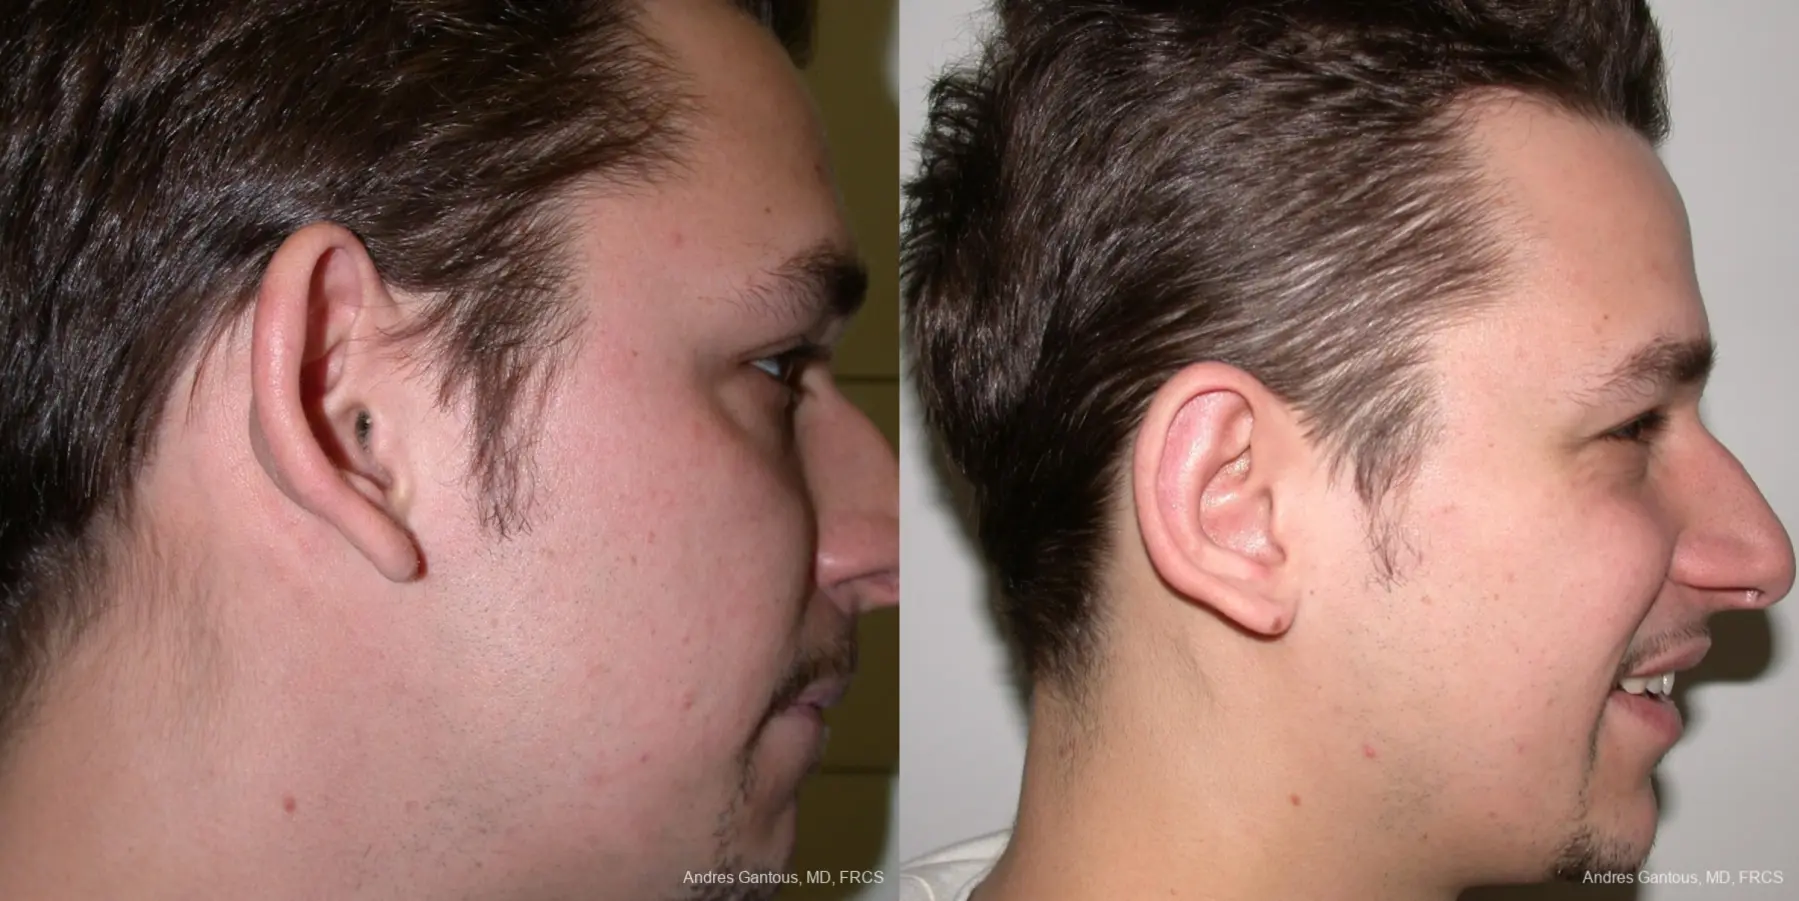 Otoplasty And Earlobe Repair: Patient 1 - Before and After 2